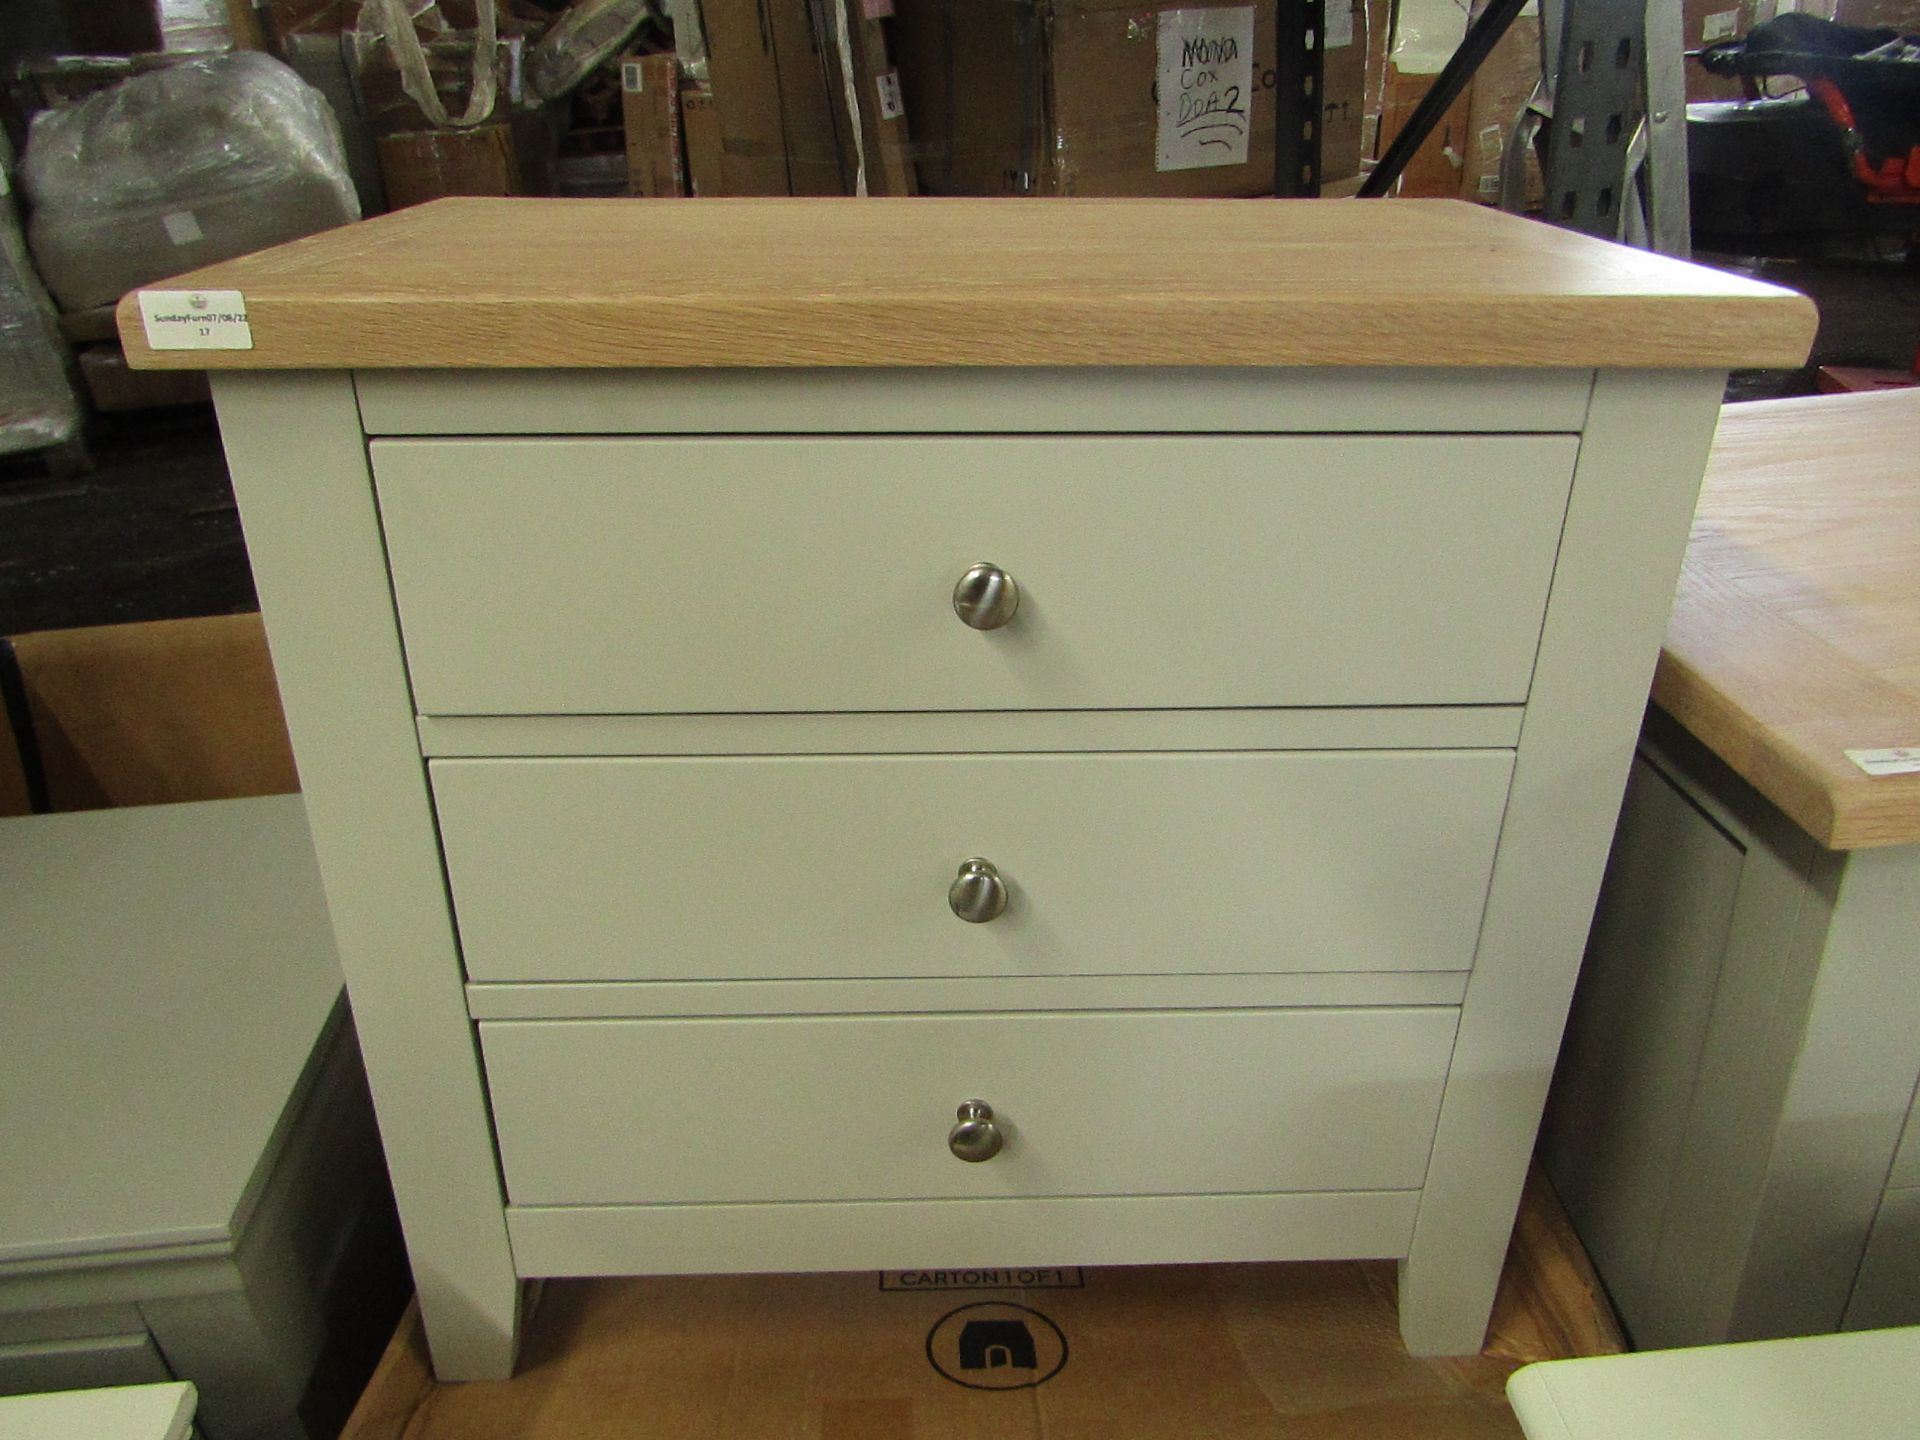 Cotswold Company Chester Dove Grey Jumbo Bedside Table RRP Â£245.00 - This item looks to be in